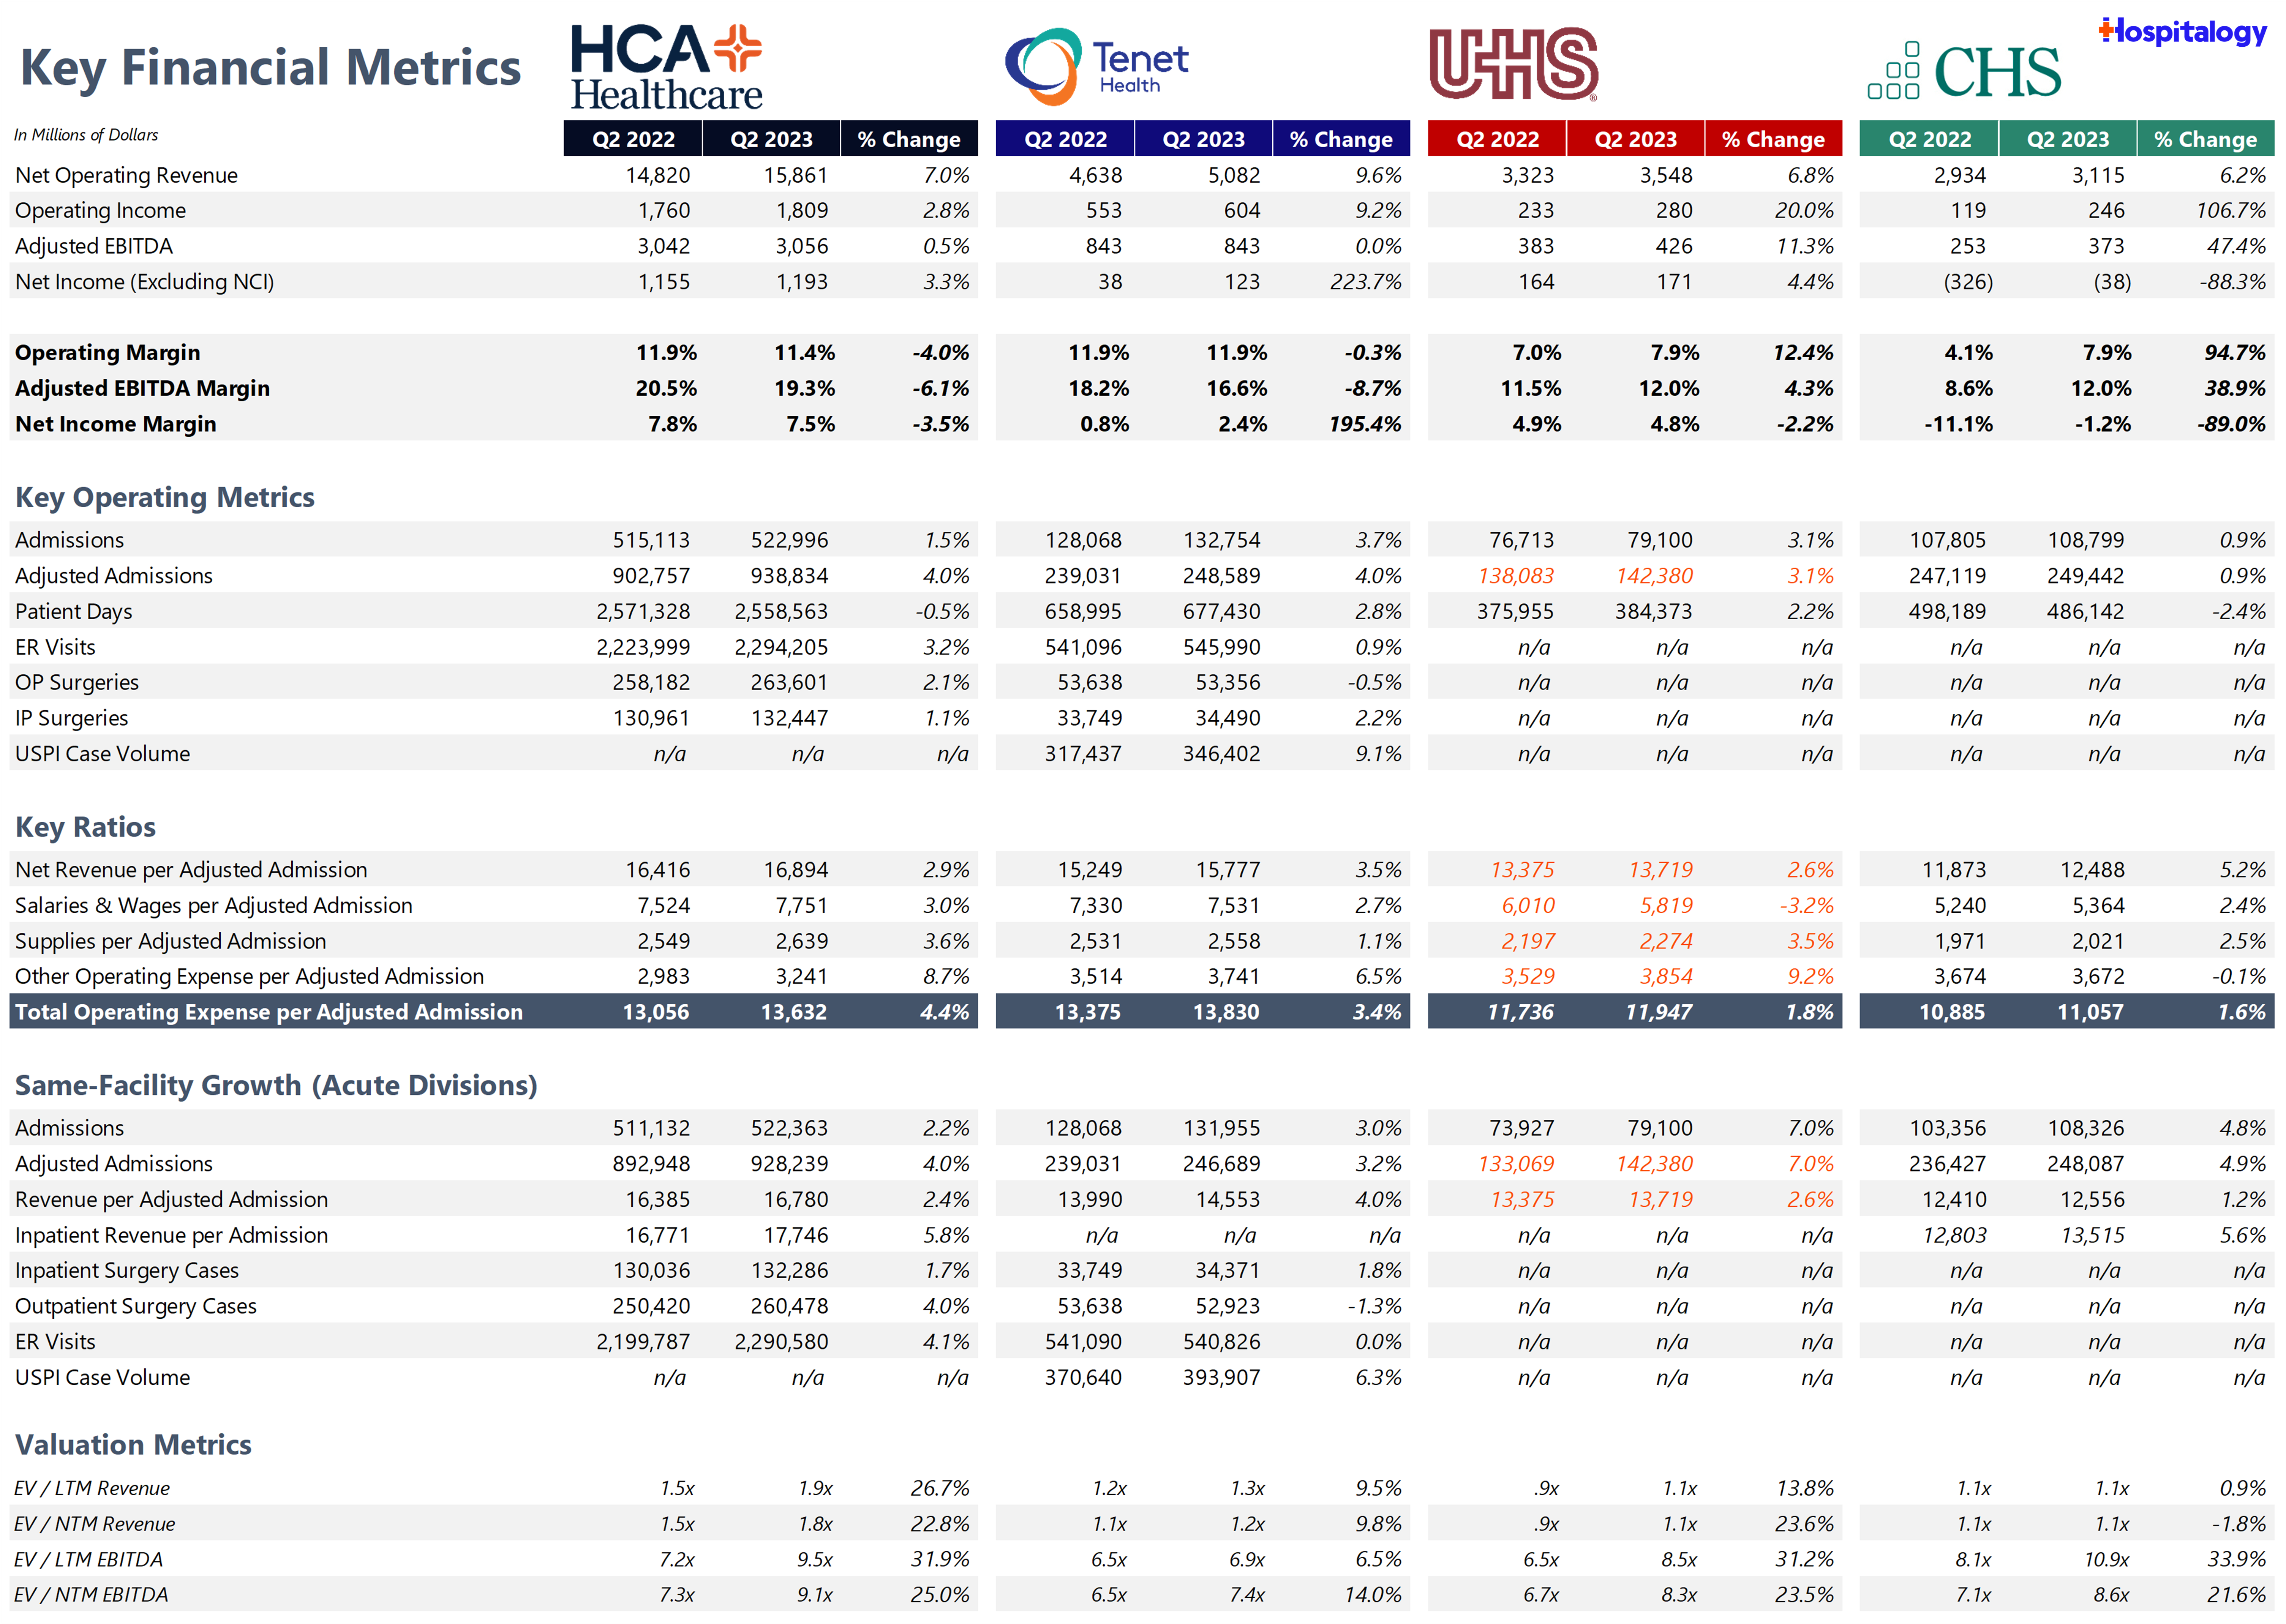 Key Q2 2023 Financial and Operating Metrics from HCA, Tenet, UHS, and CHS - Hospitalogy